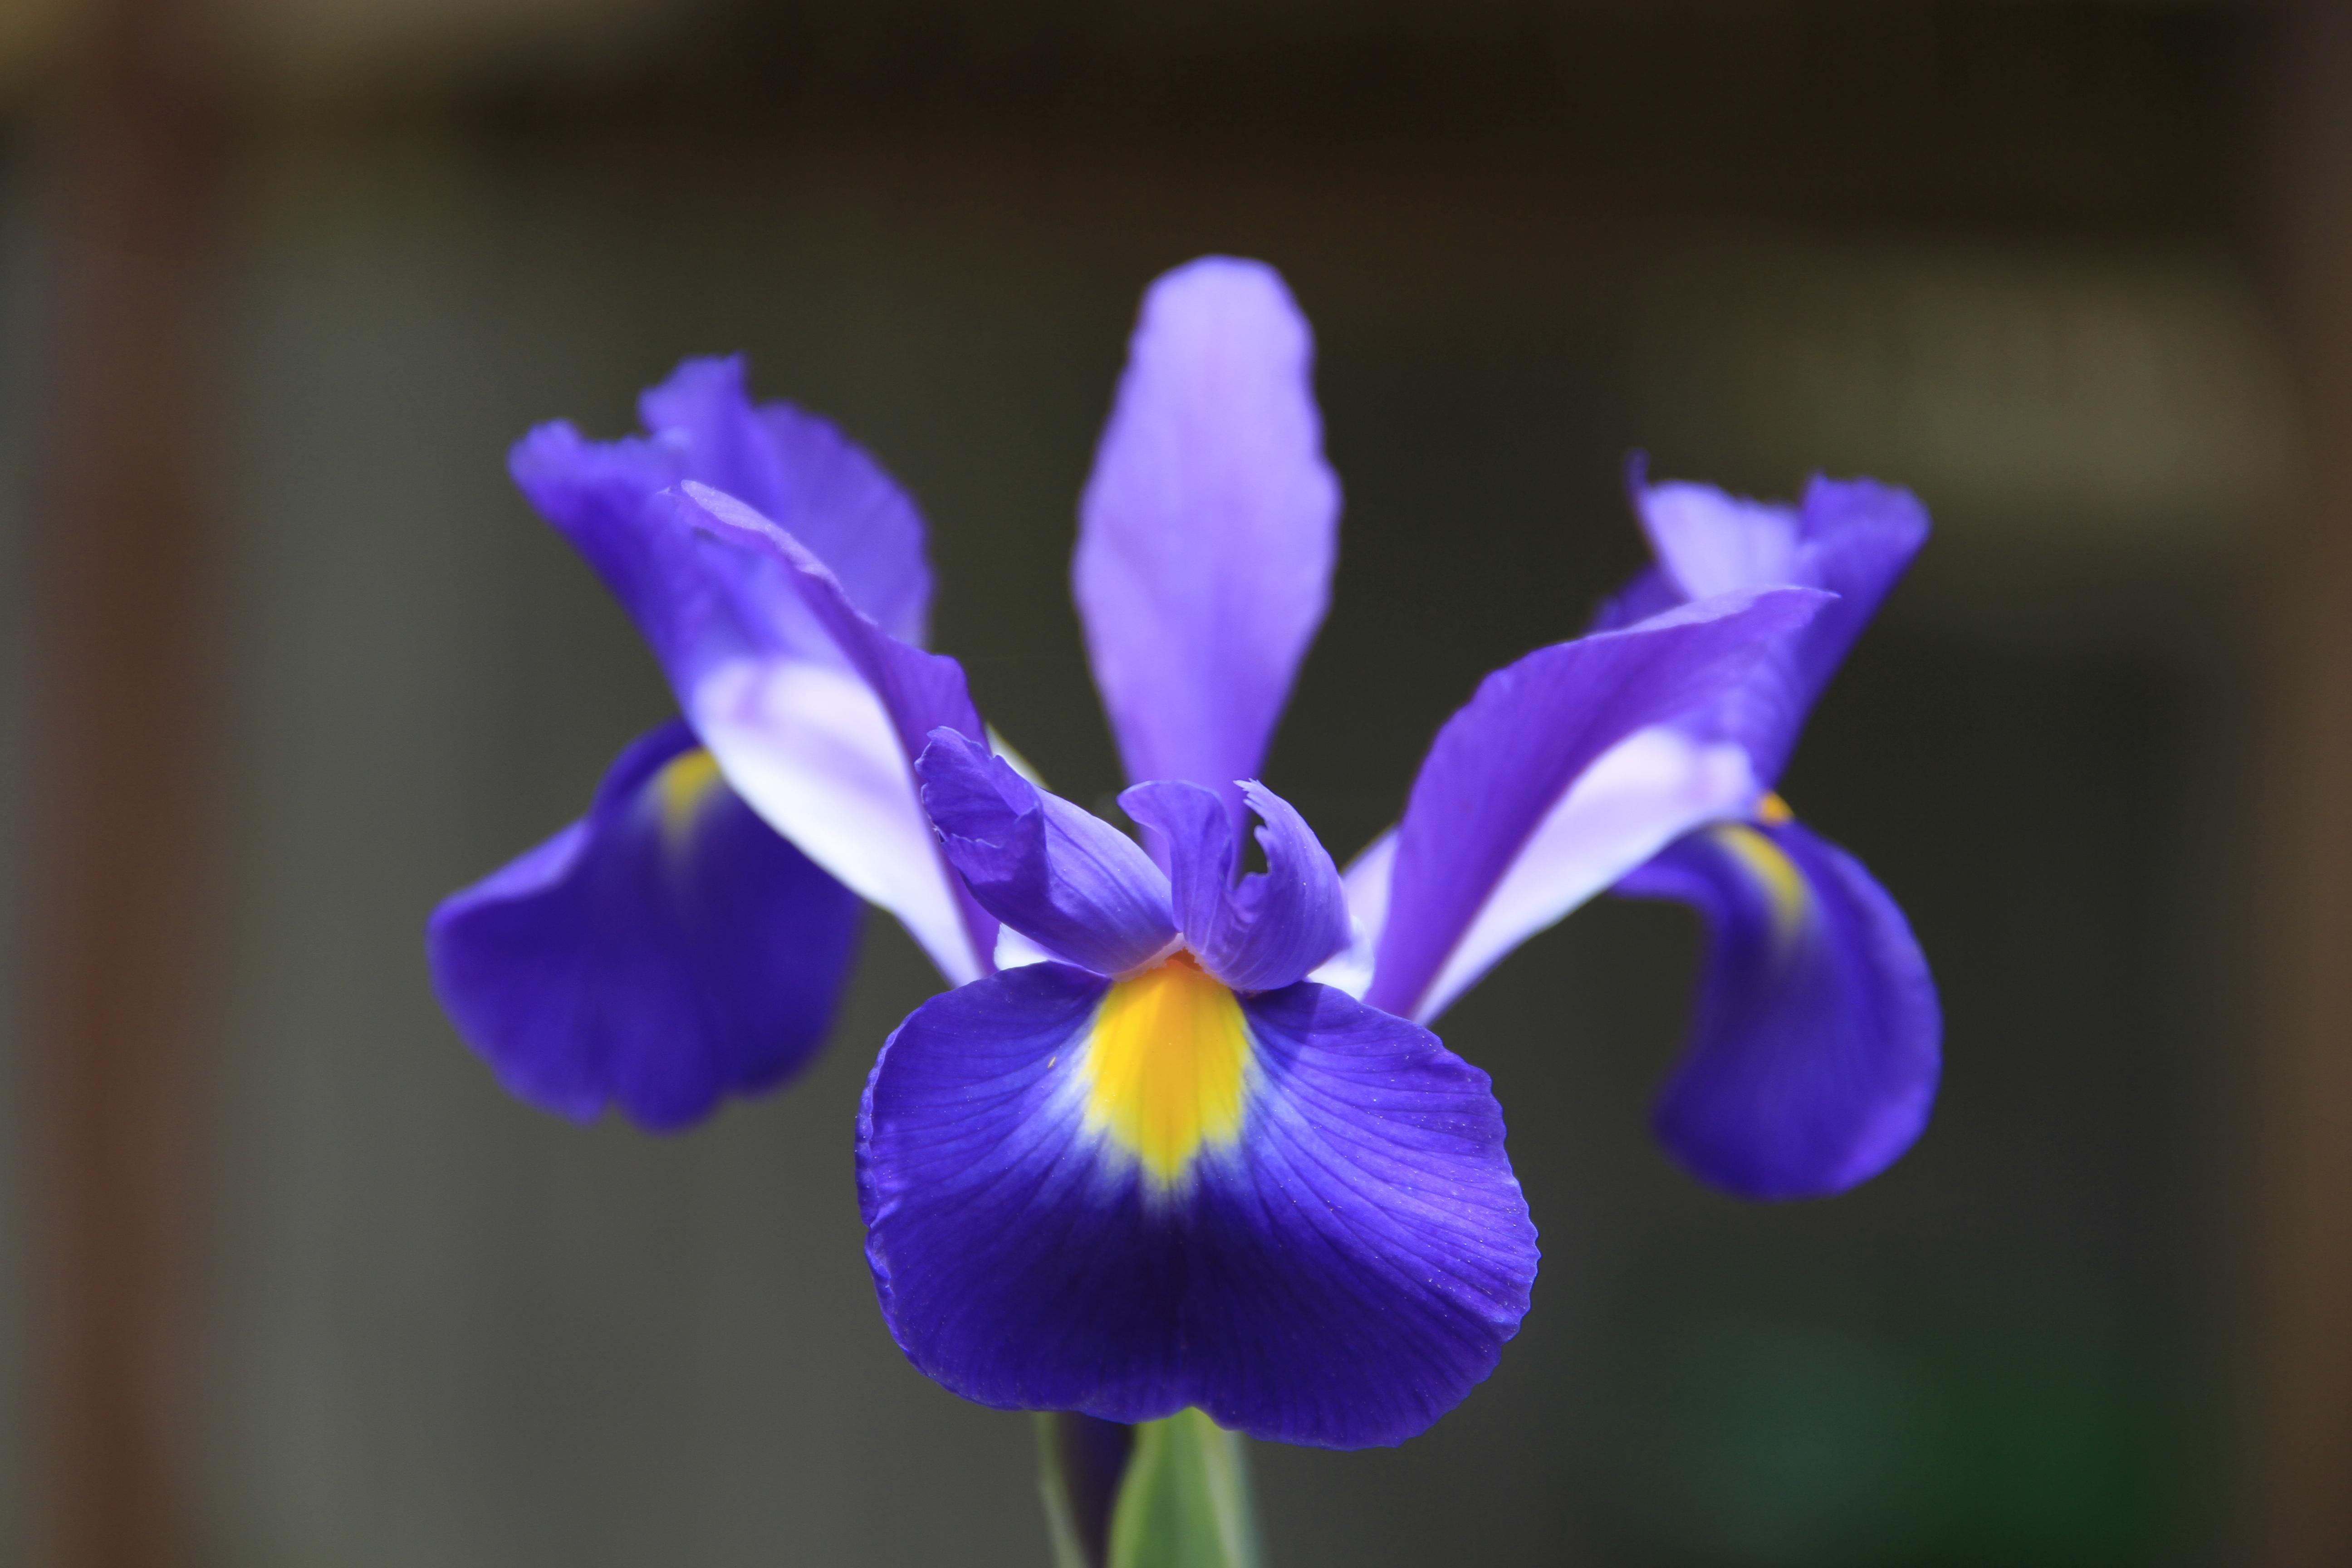 Purple Iris Flower Image. Top Collection of different types